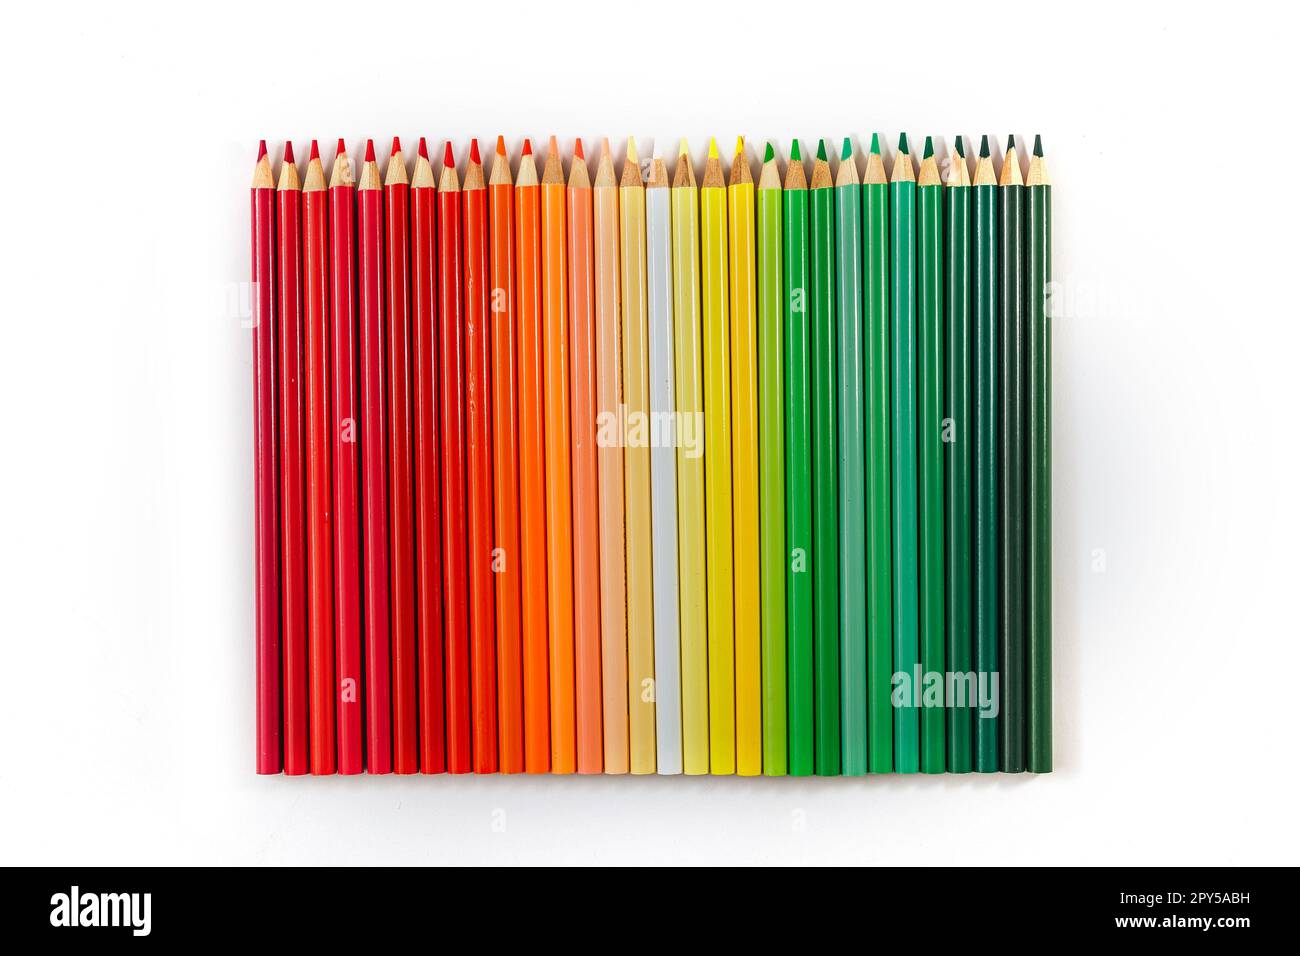 Colored multicolored wooden pencils on a white background. Stock Photo